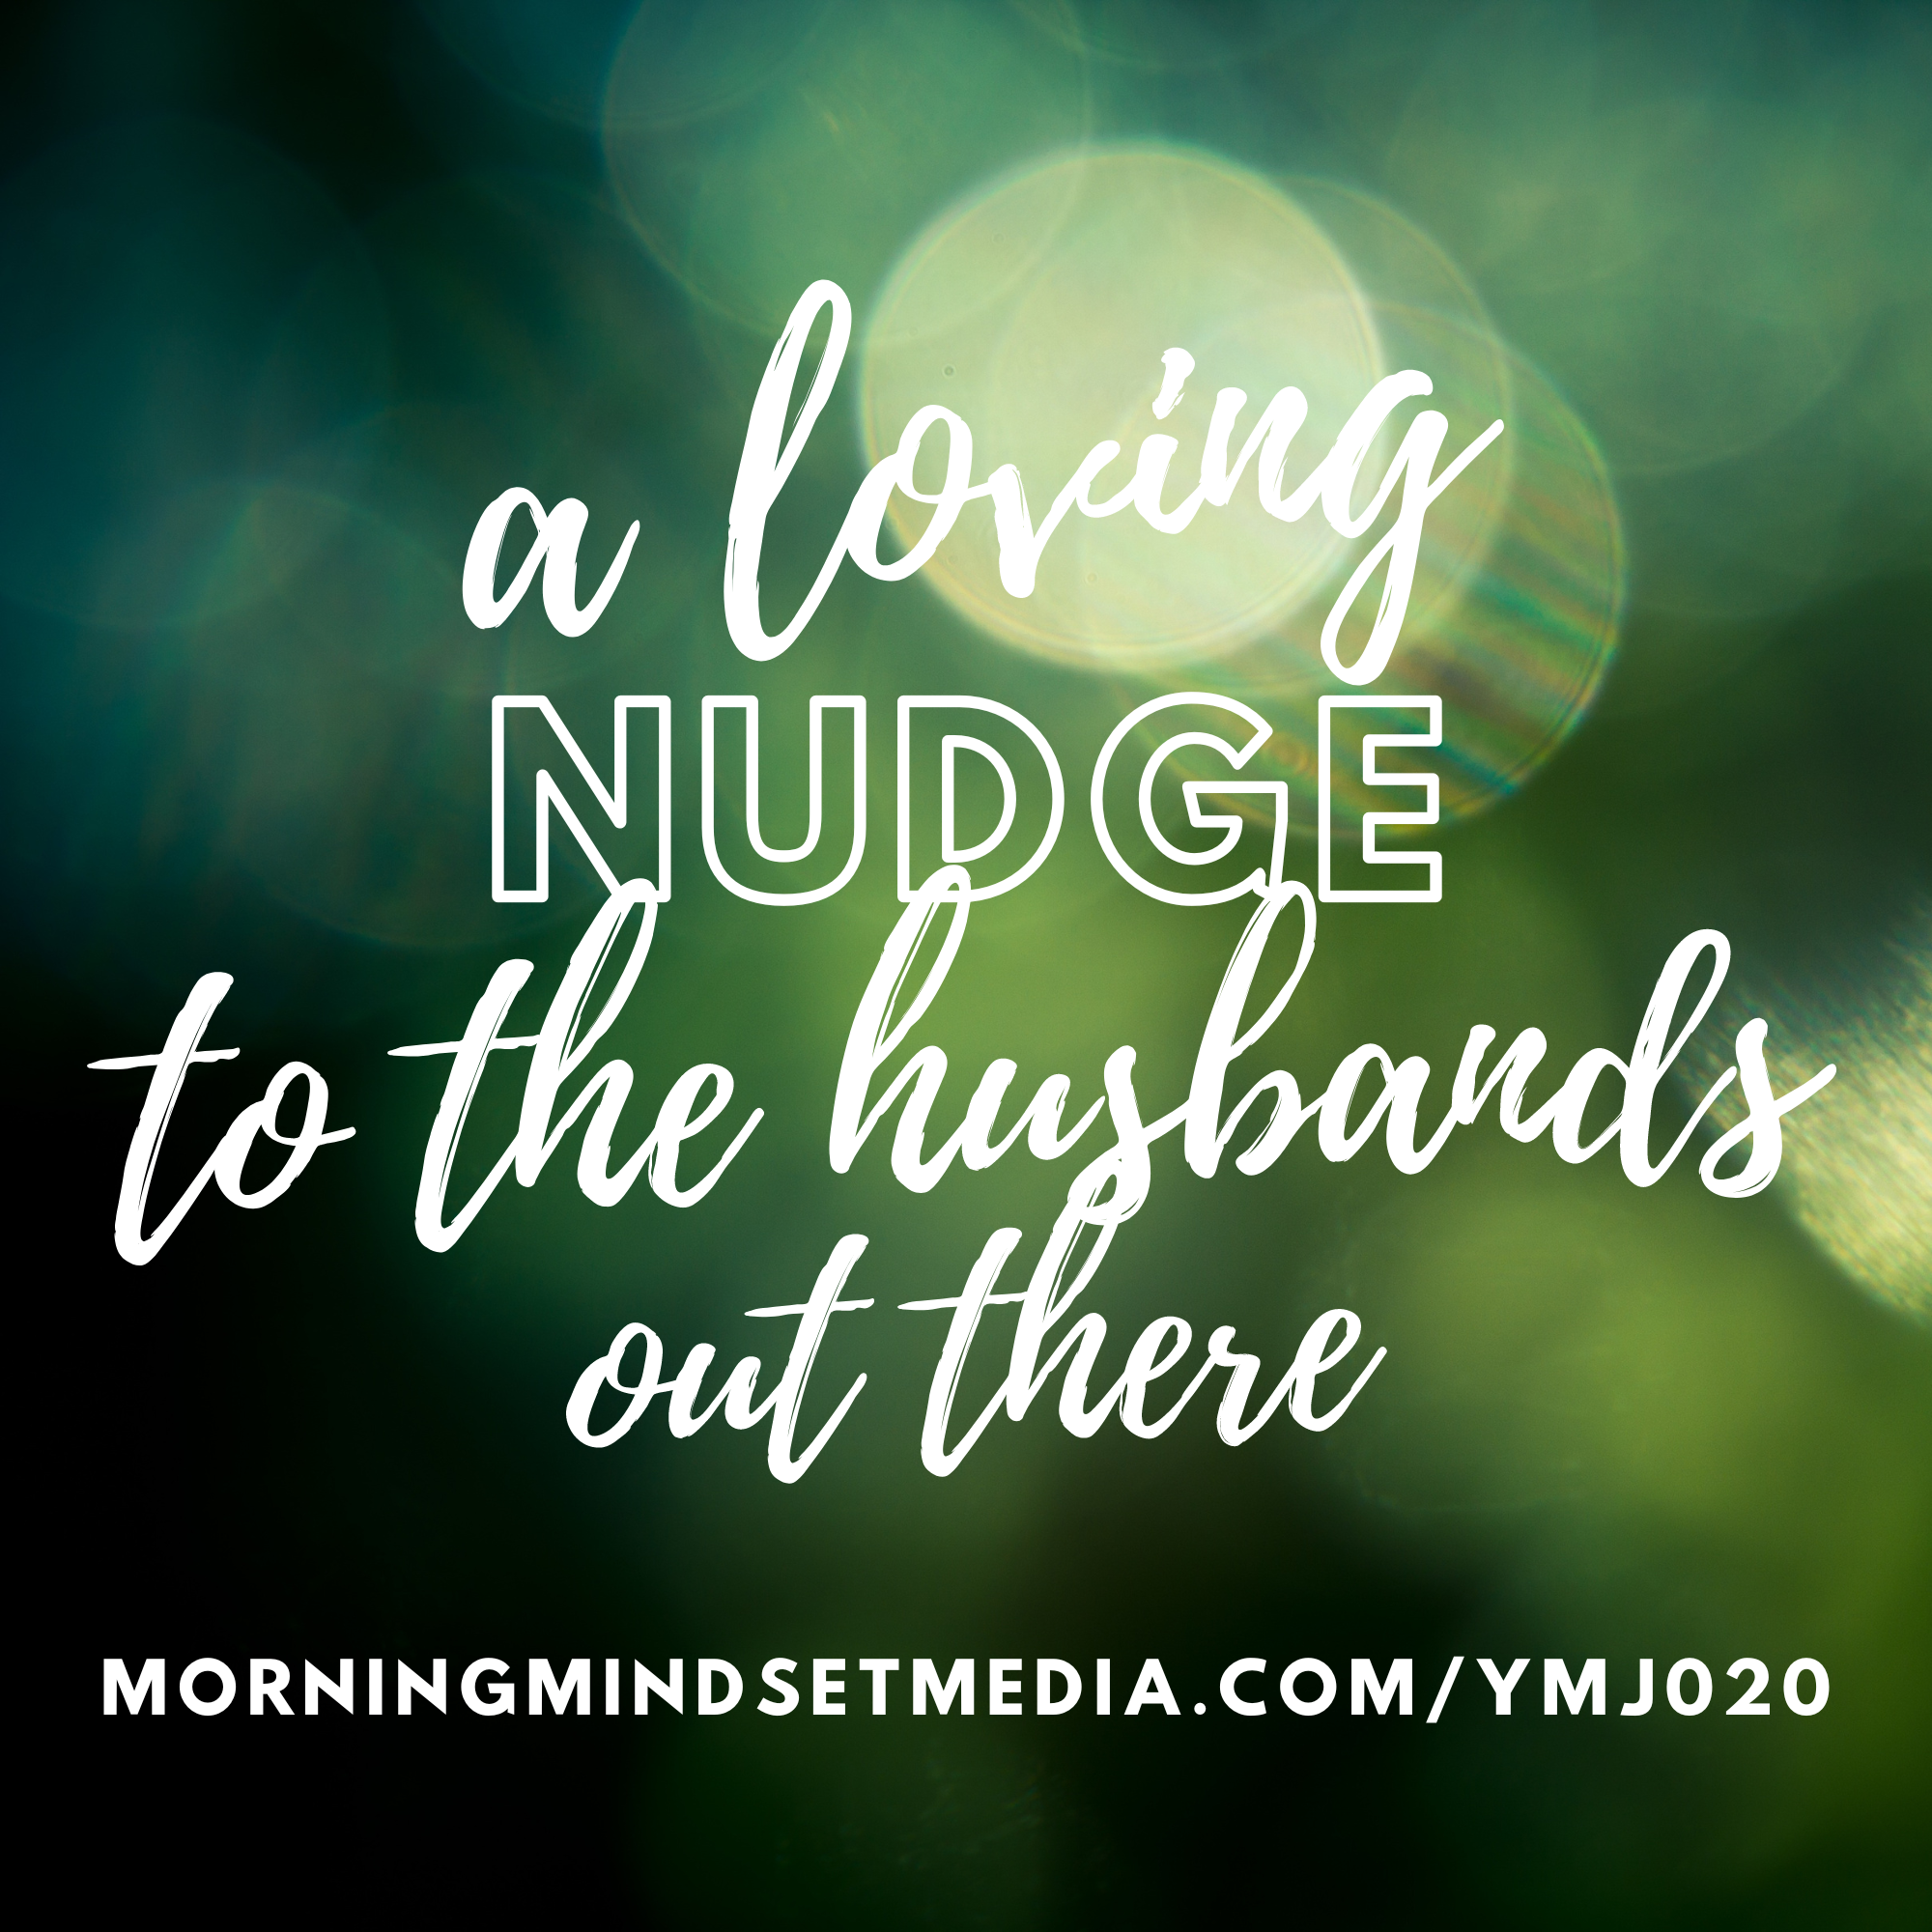 020: A loving nudge to husbands